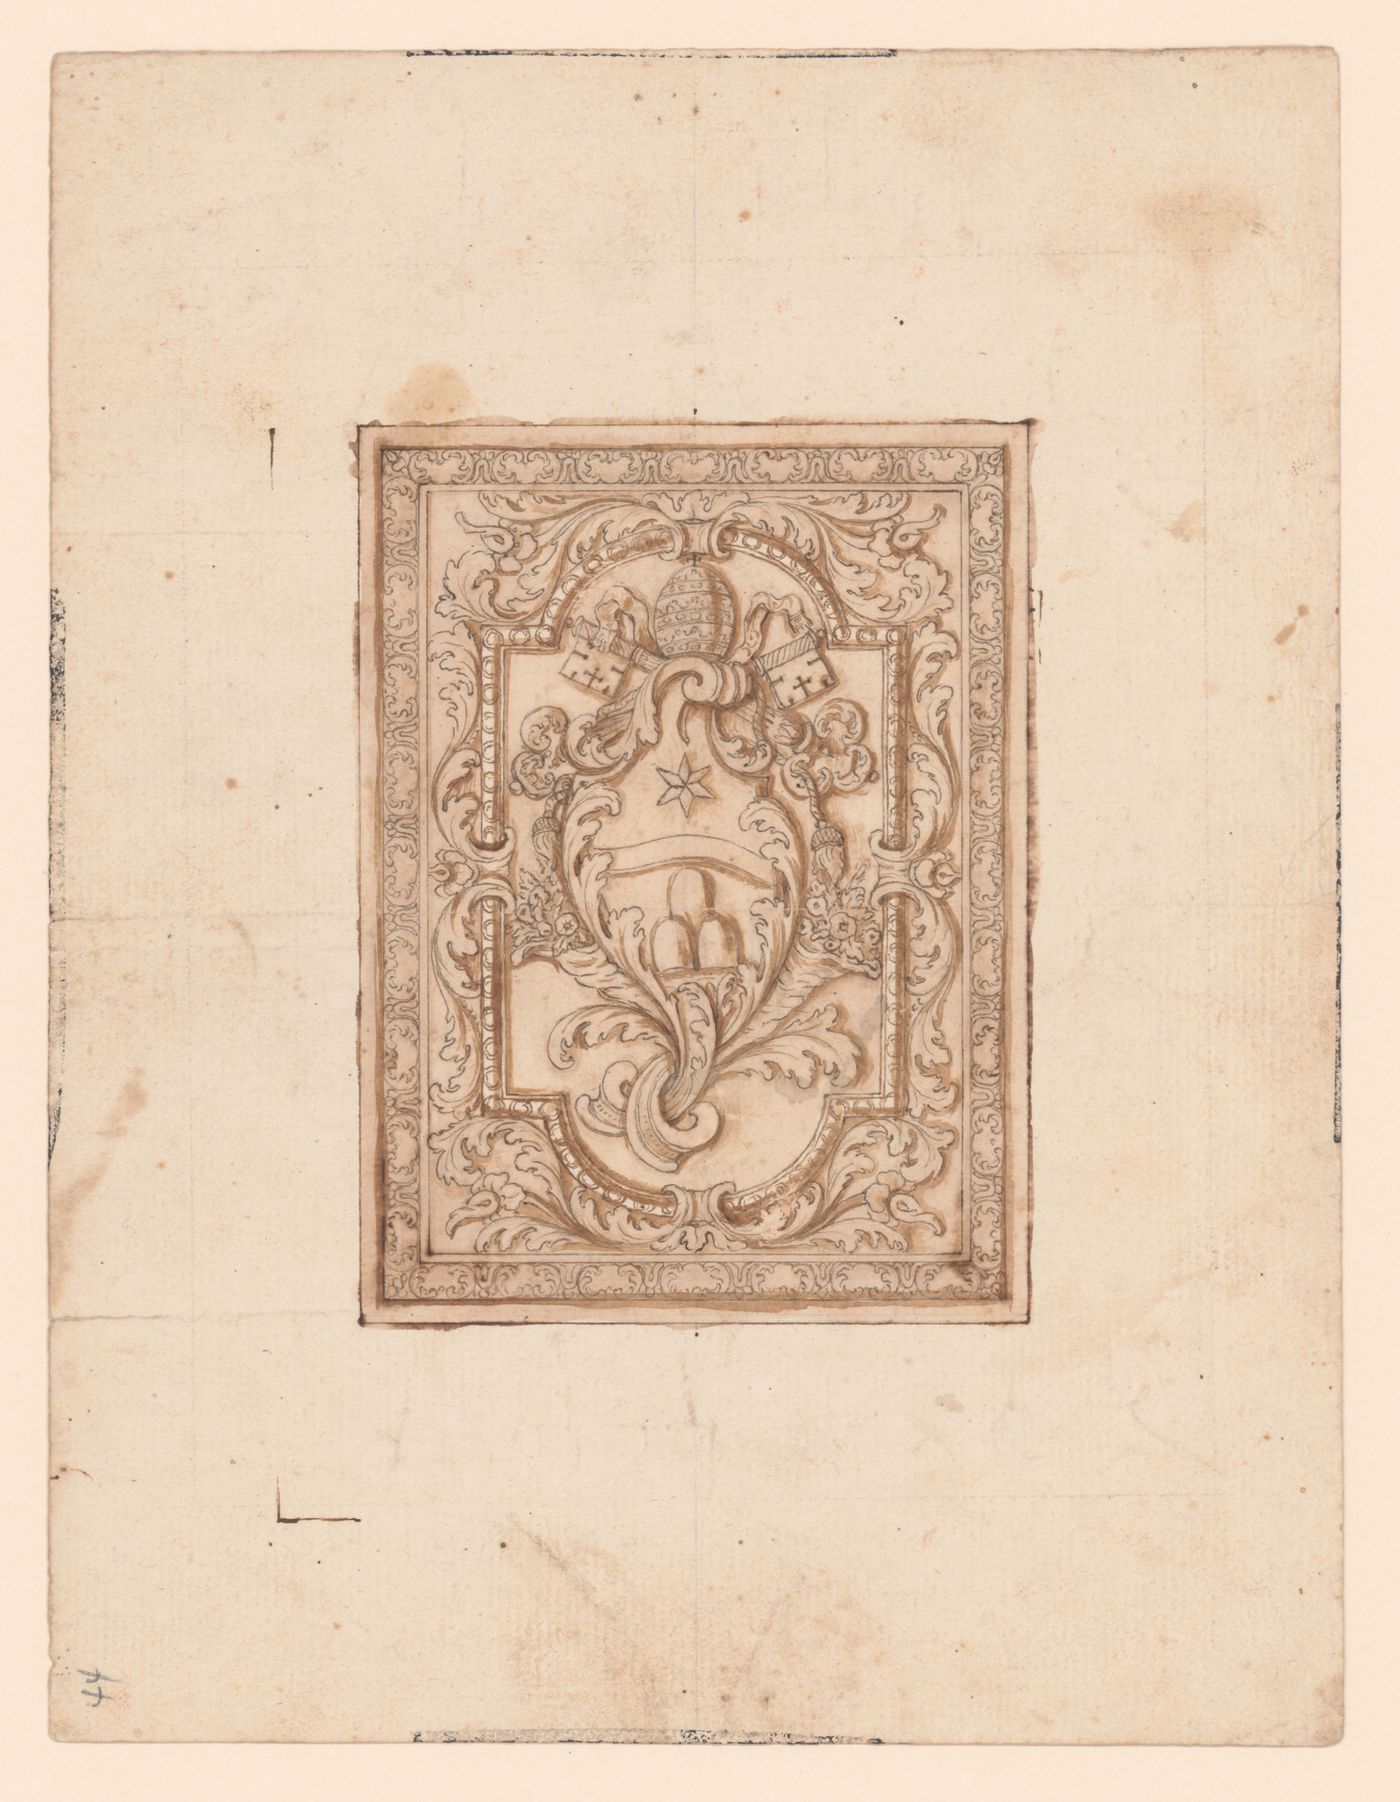 Plan for a ceiling design or book cover with a papal escutcheon